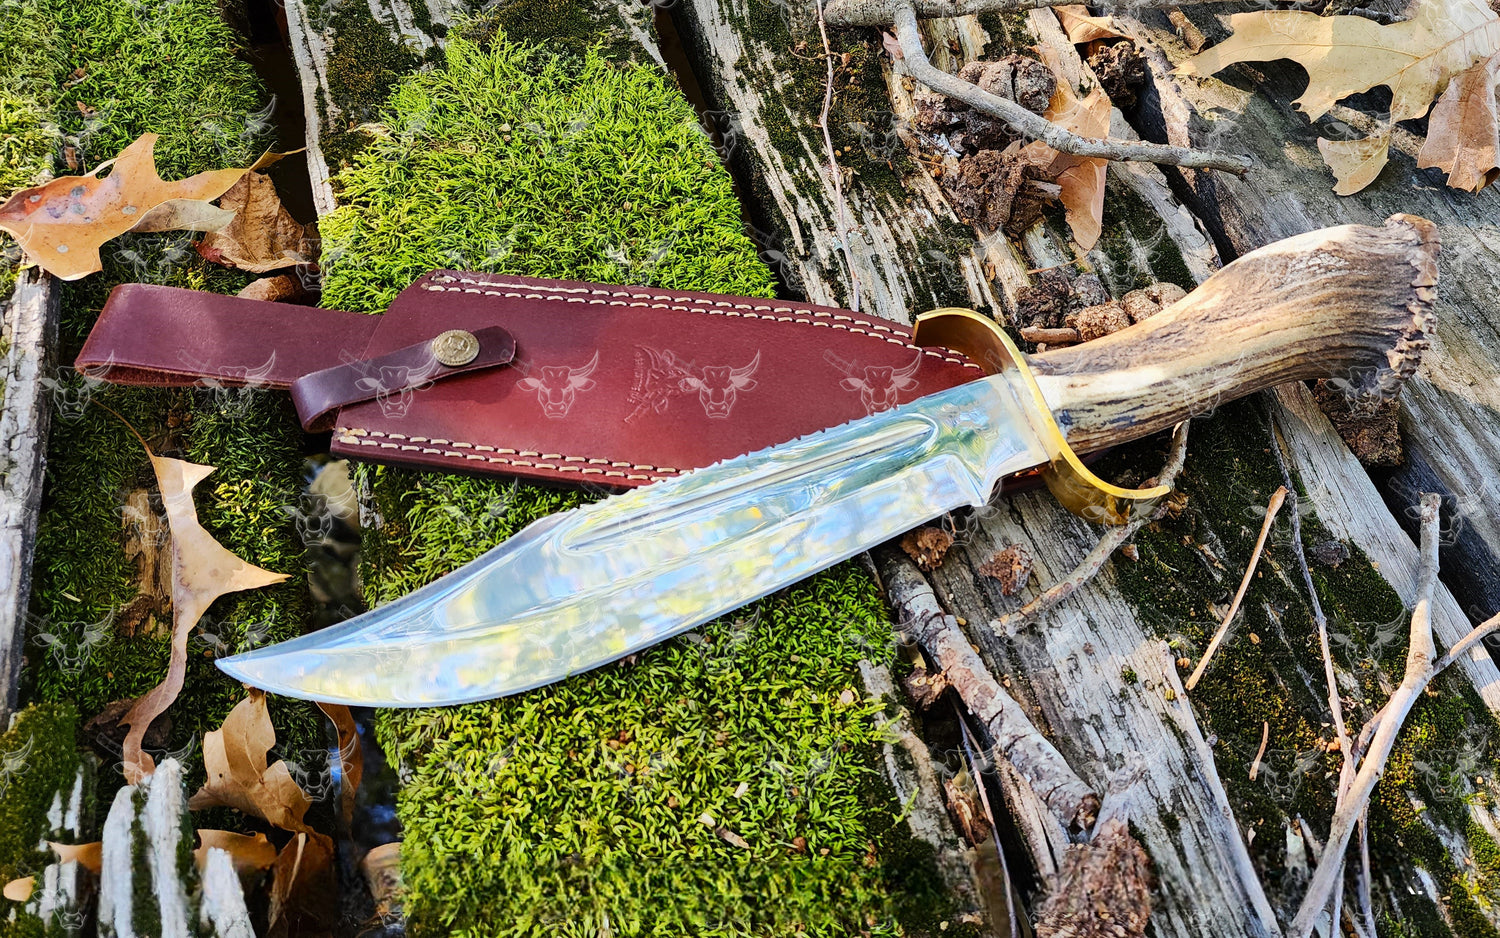 Premium Hand crafted knives